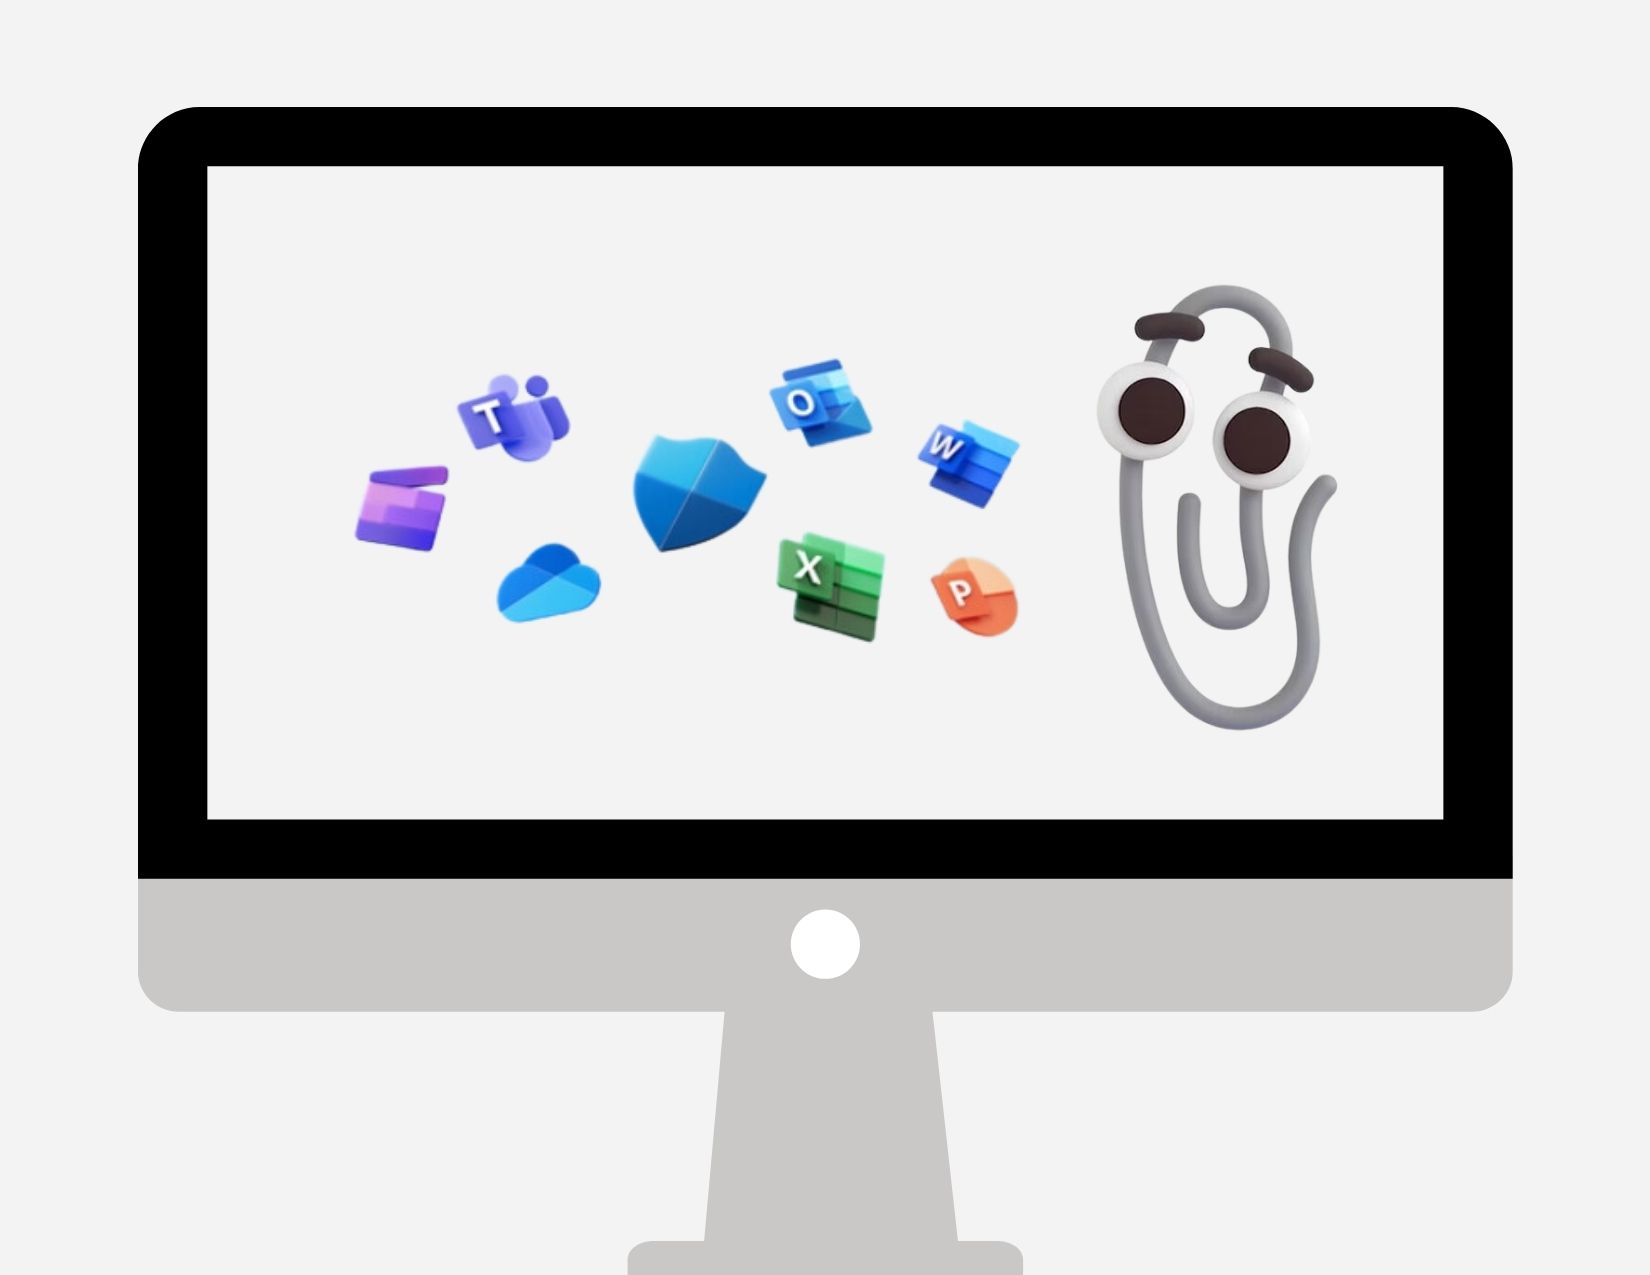 Illustration of a desktop computer. On the screen, icons for Office products float next to a large paper clip with a smiley face and googly eyes.